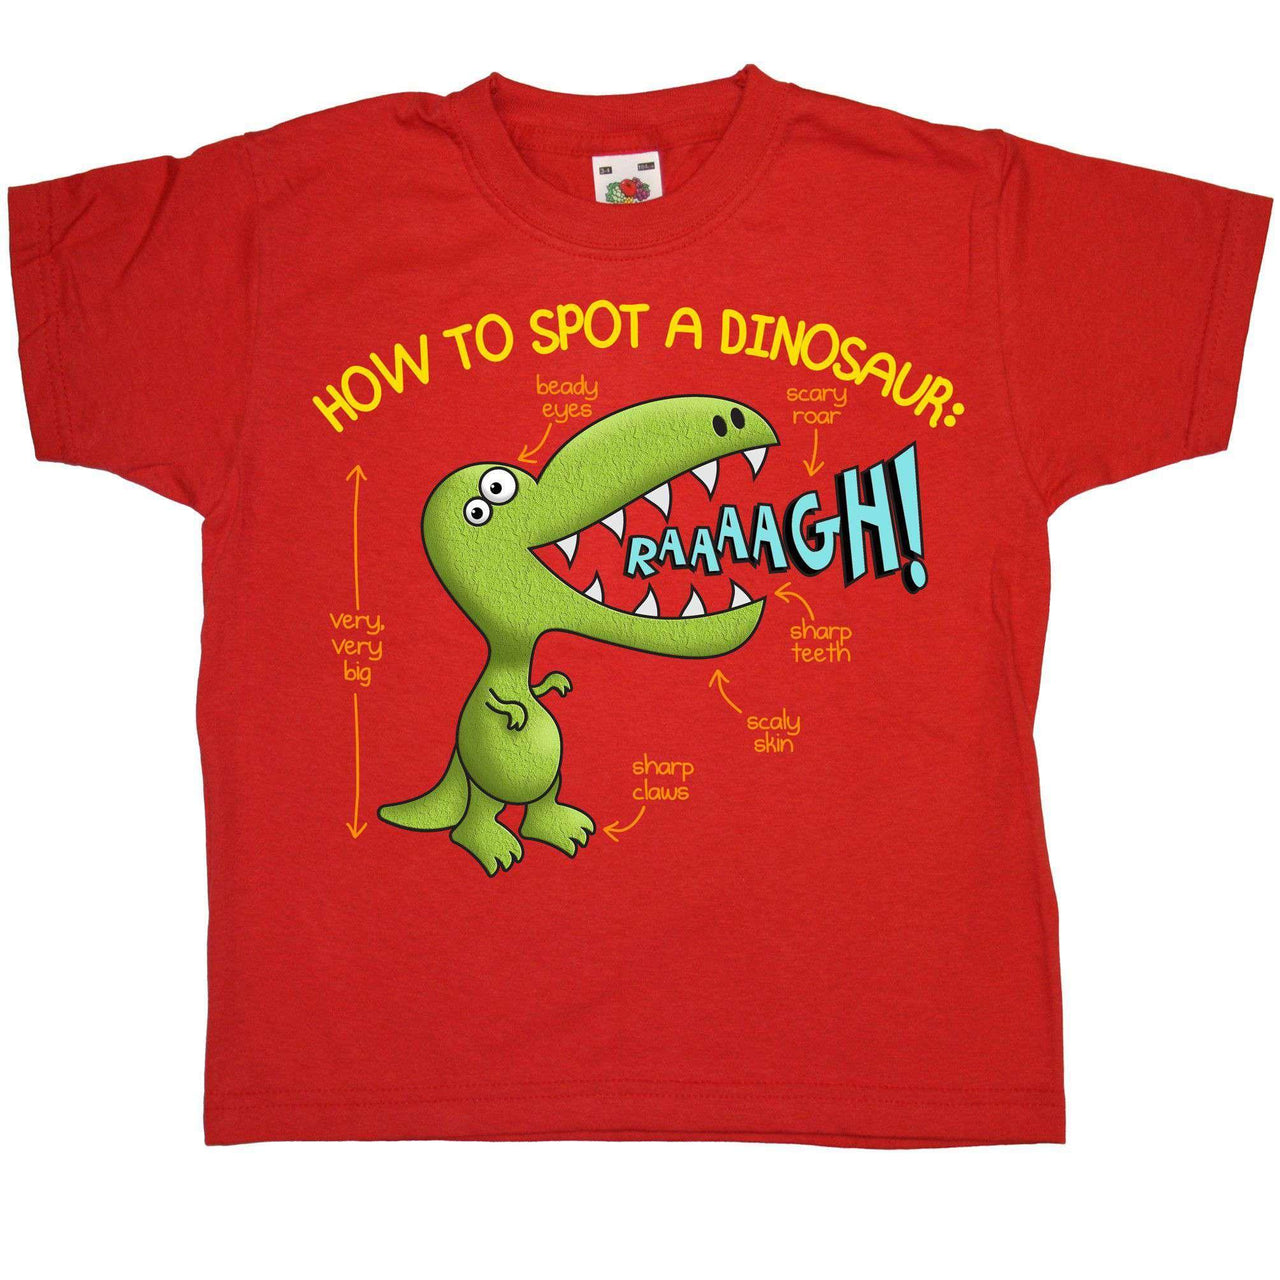 How To Spot A Dinosaur Childrens Graphic T-Shirt 8Ball